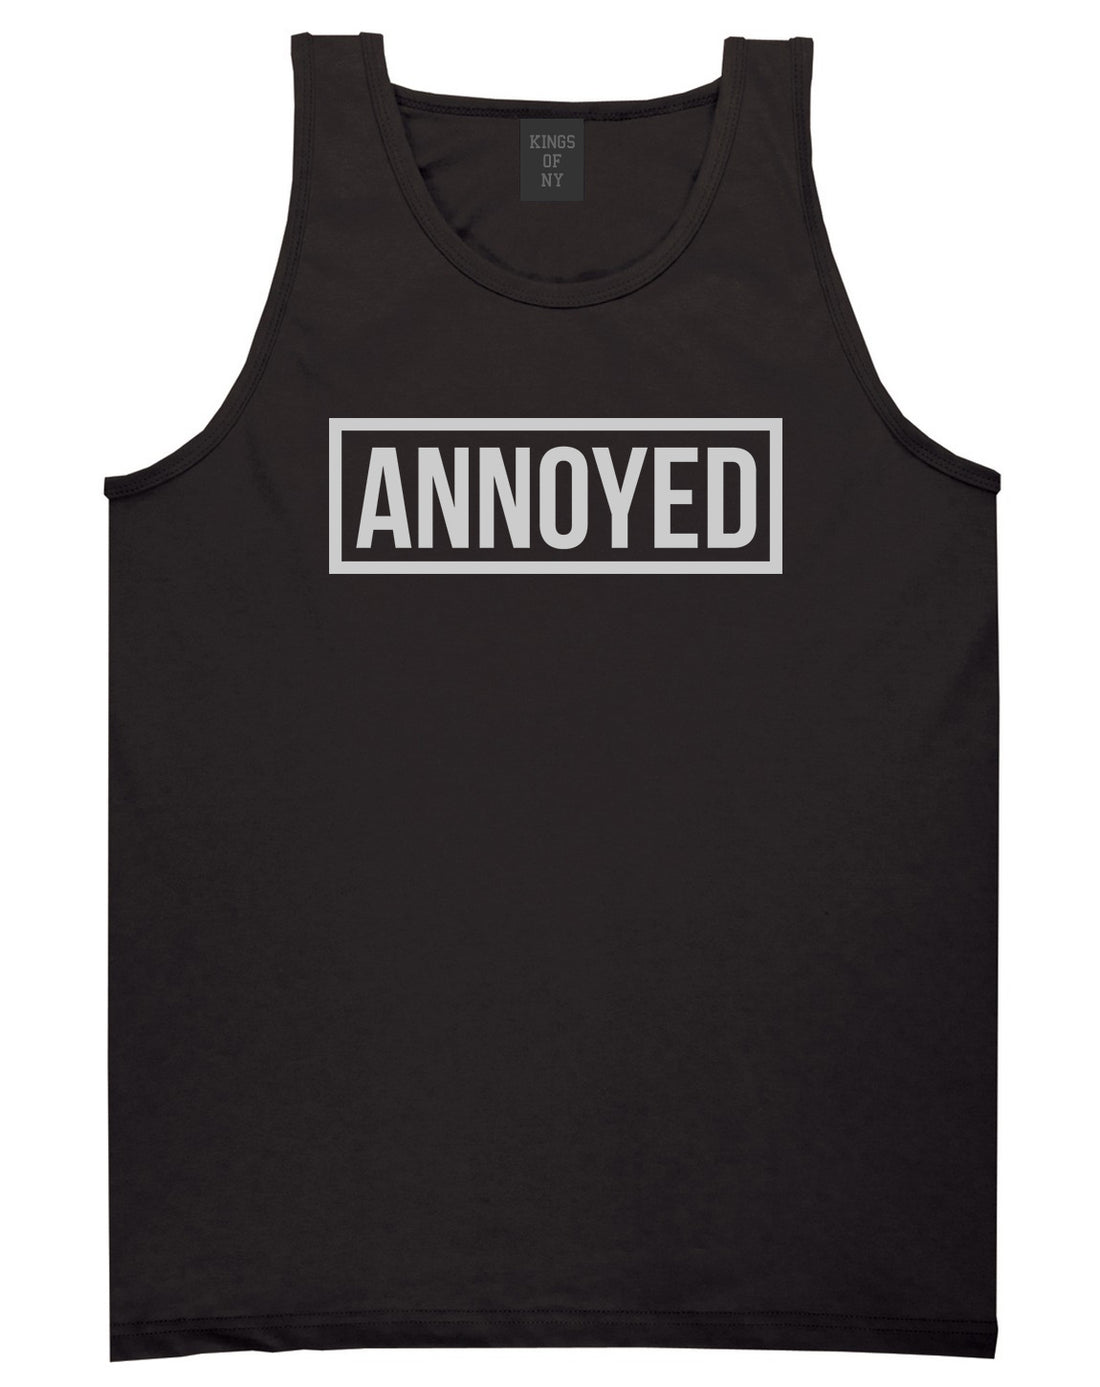 Annoyed Black Tank Top Shirt by Kings Of NY